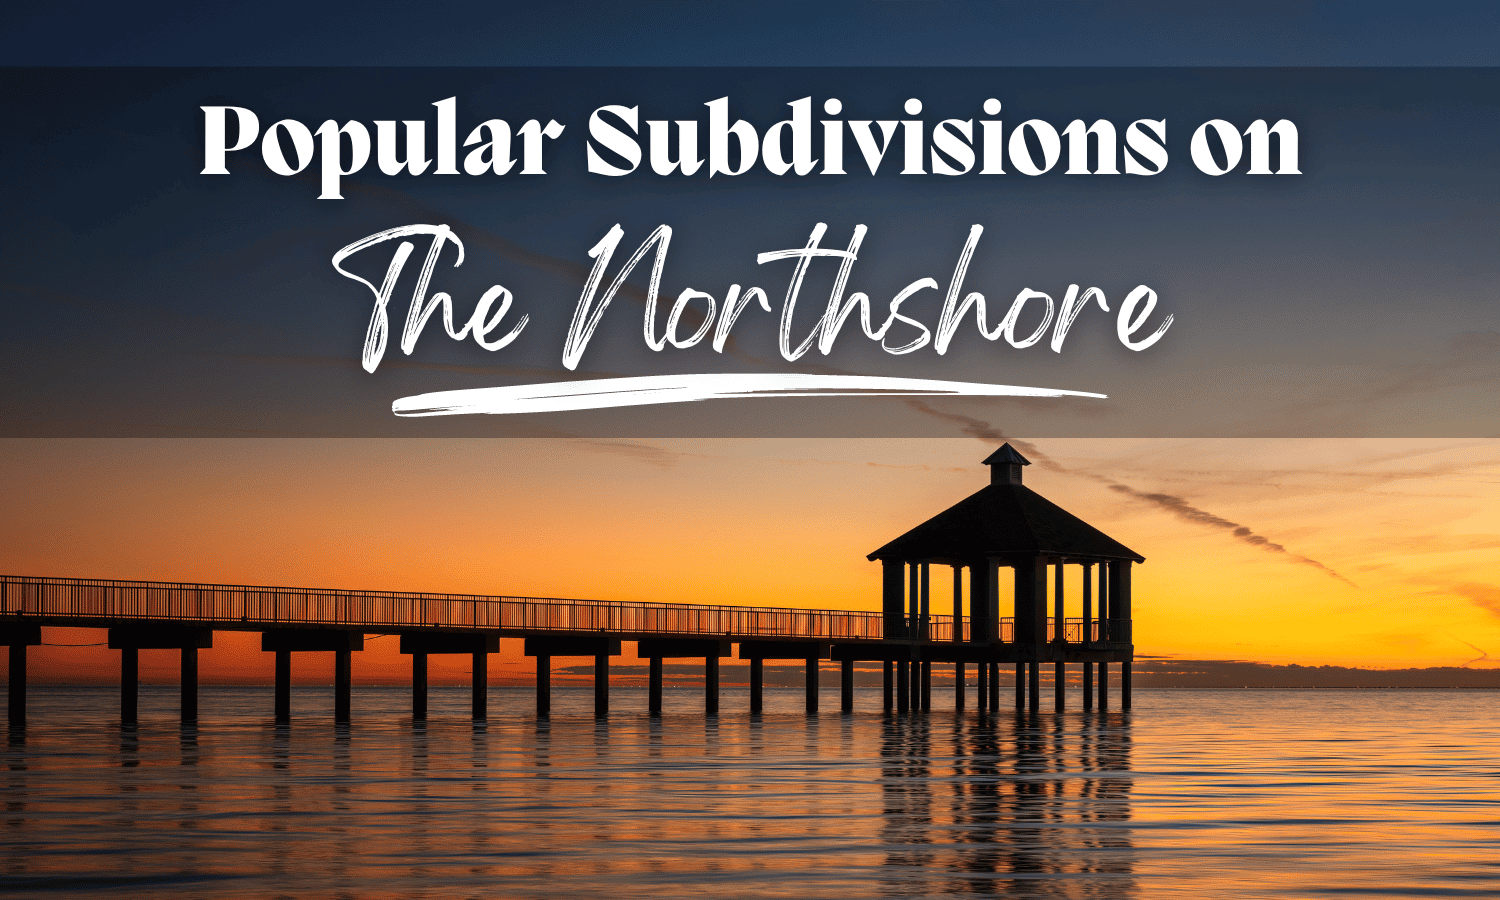 Popular Subdivisions on the Northshore